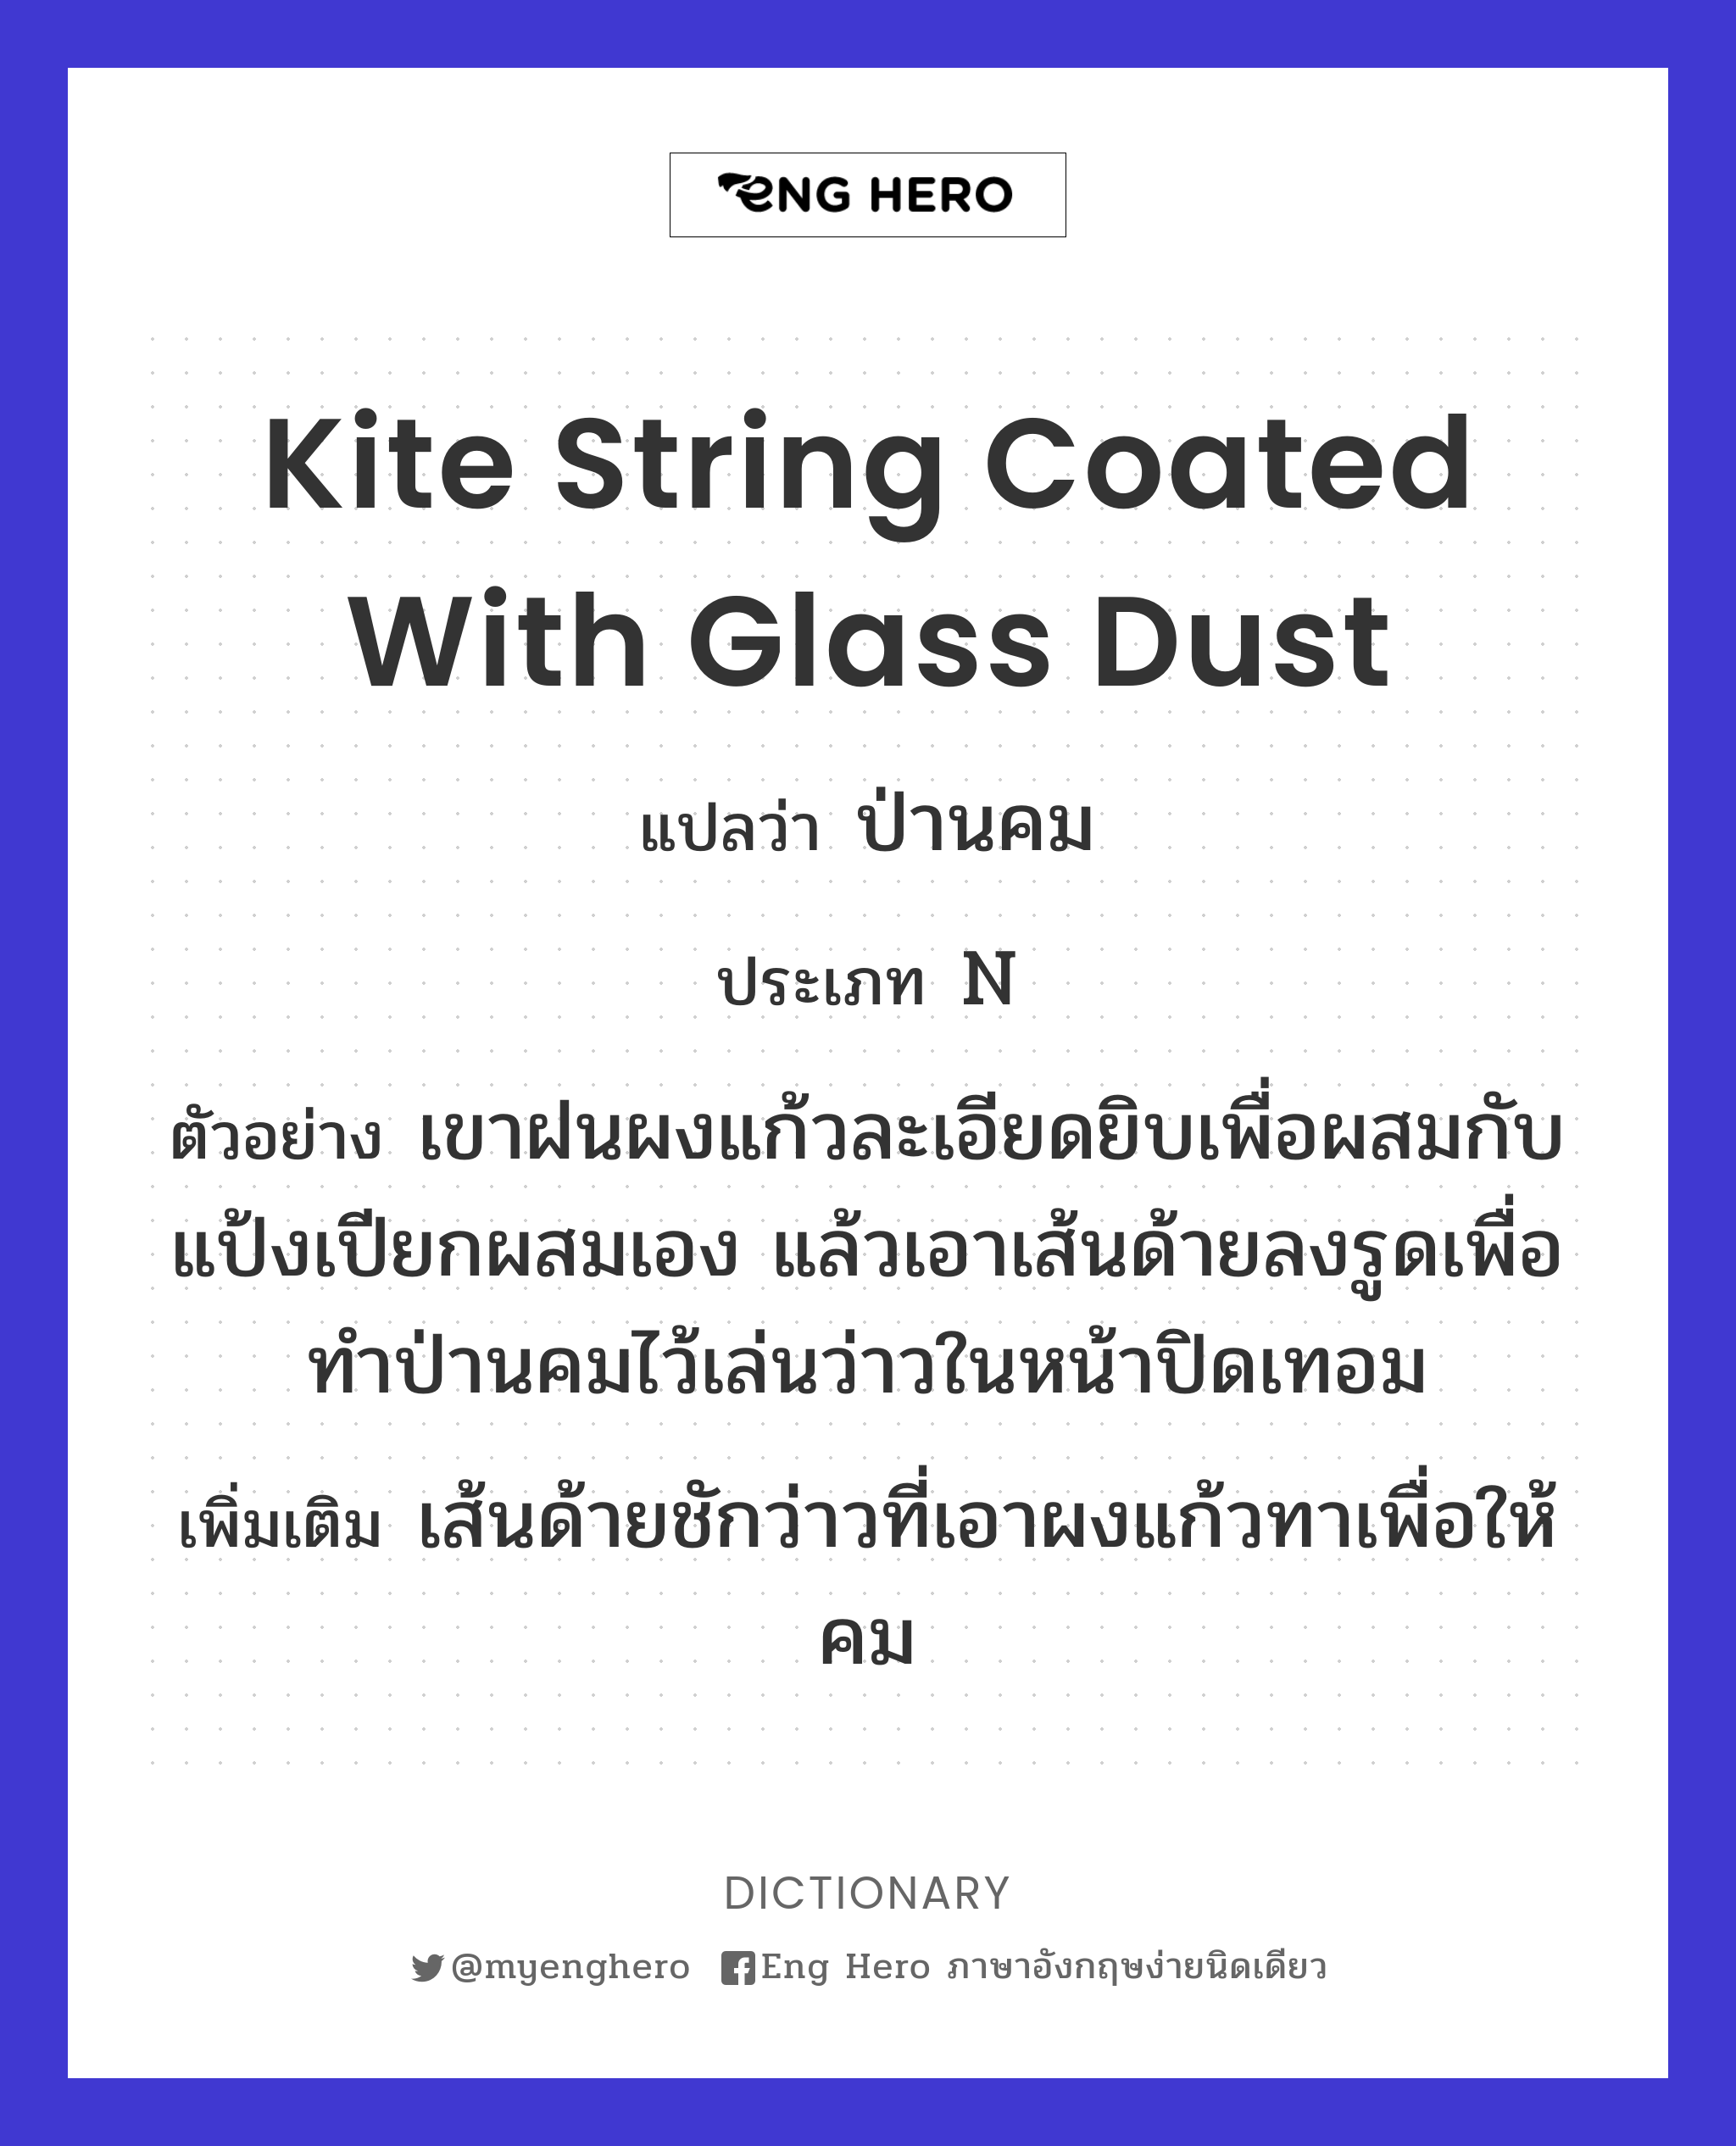 kite string coated with glass dust